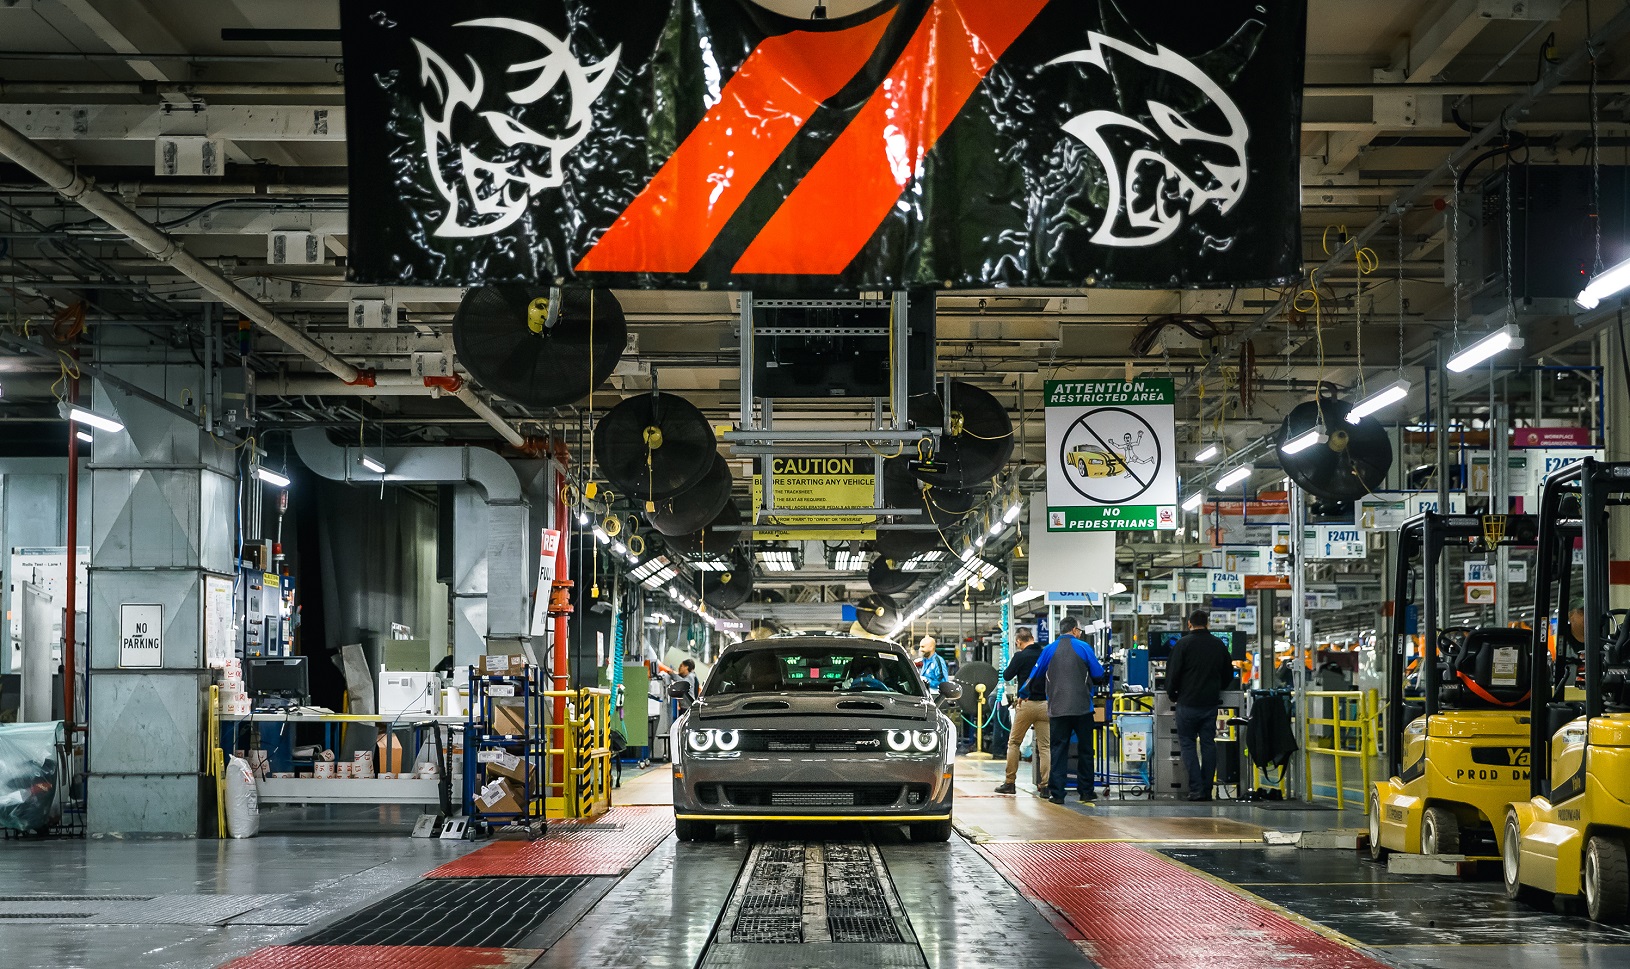 2019 Dodge Challenger SRT Hellcat Redeye models are now rolling off the line as production of the 797-horsepower muscle car started today at the FCA US Brampton Assembly Plant (Ontario, Canada).